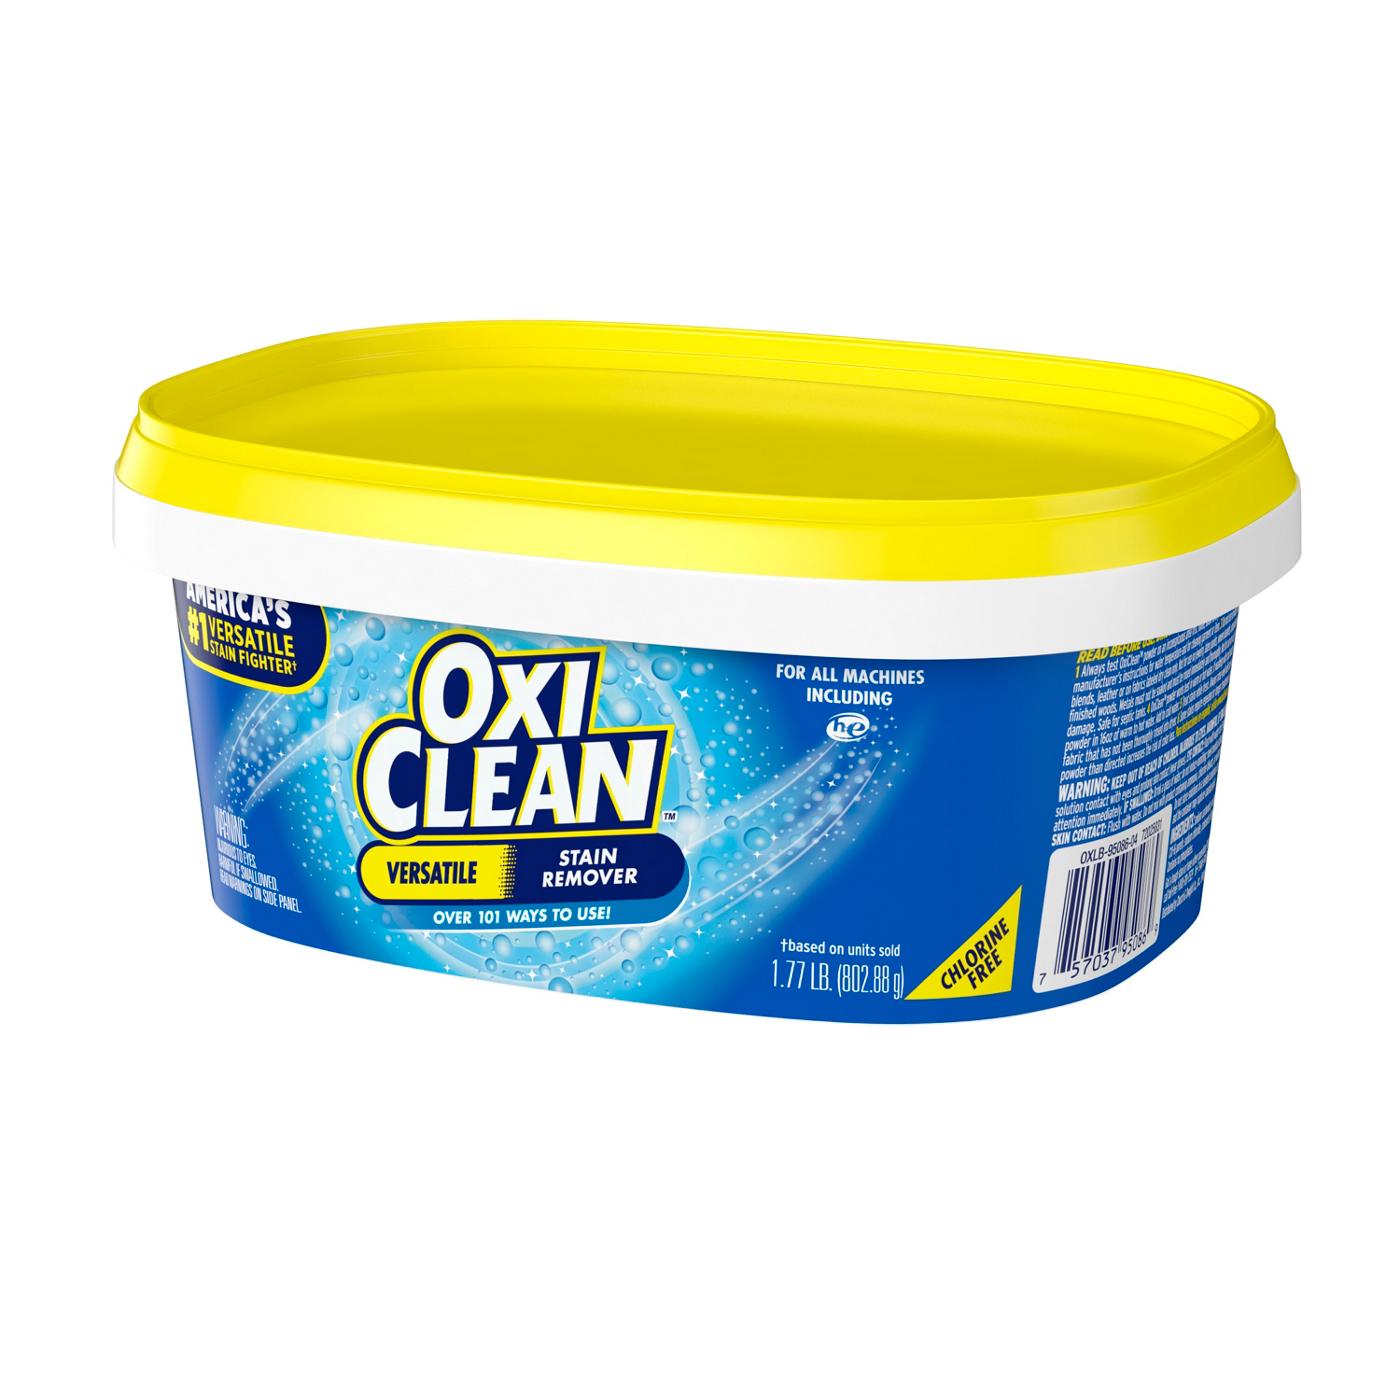 OxiClean Versatile Stain Remover; image 3 of 3